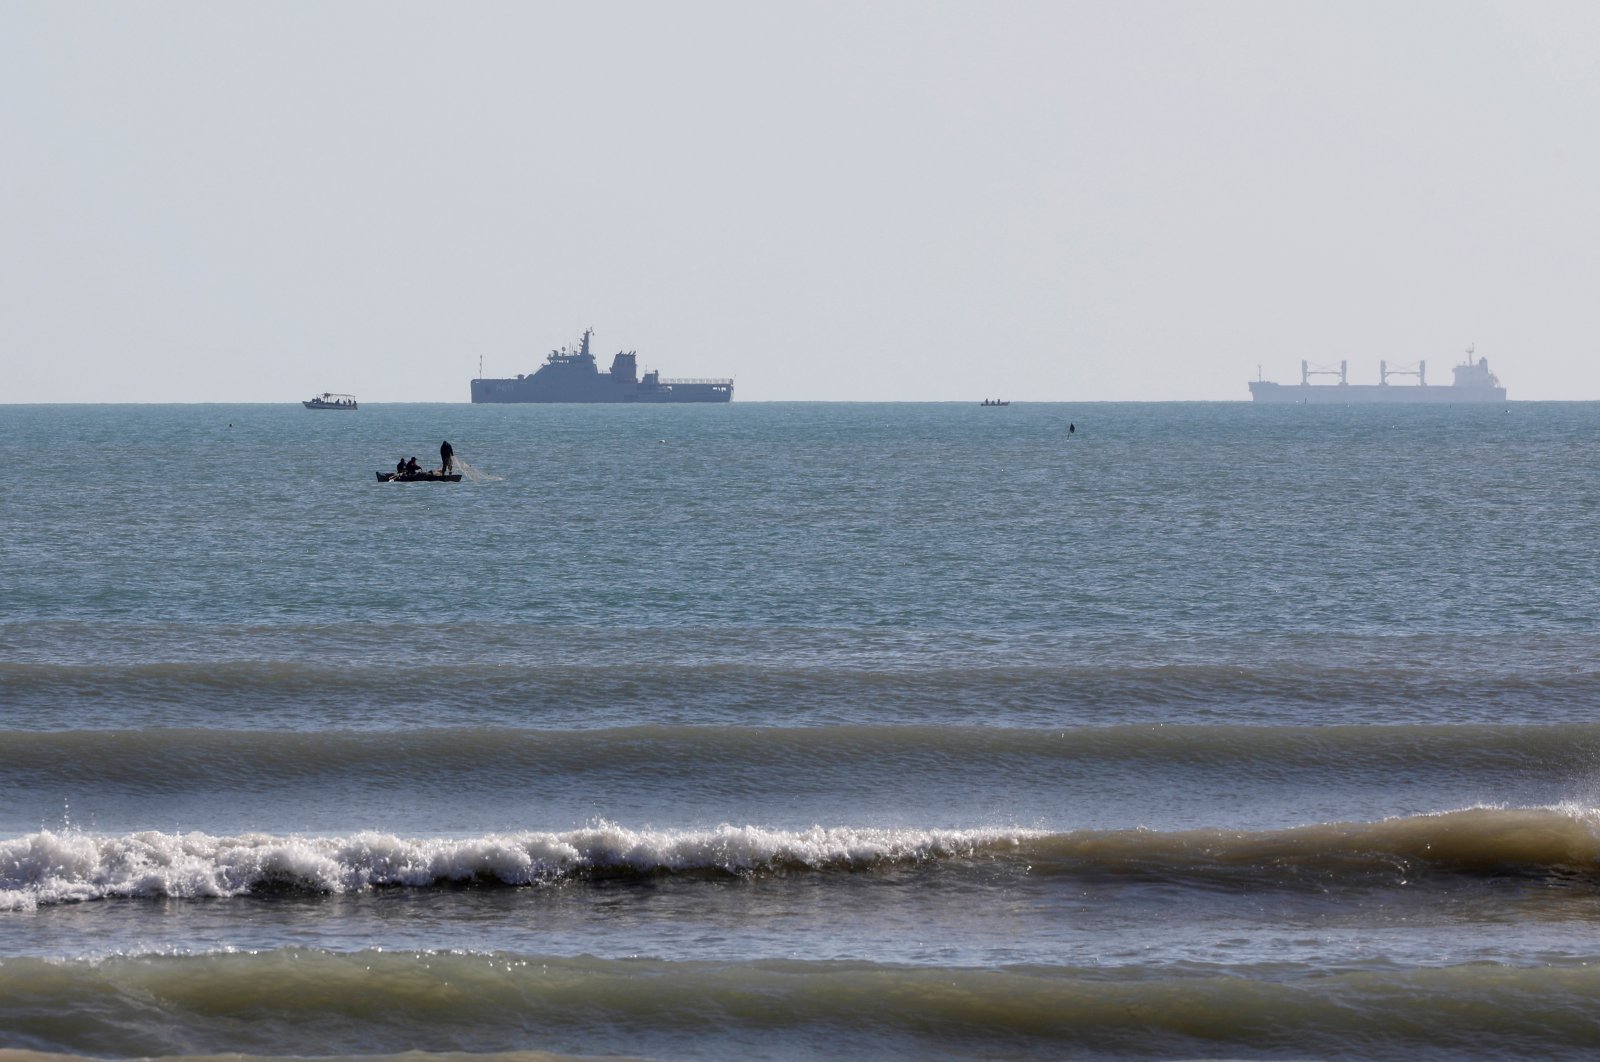 Boats are seen off the coast of Gabes where a merchant fuel ship sank, Tunisia, April 17, 2022. (Reuters Photo)